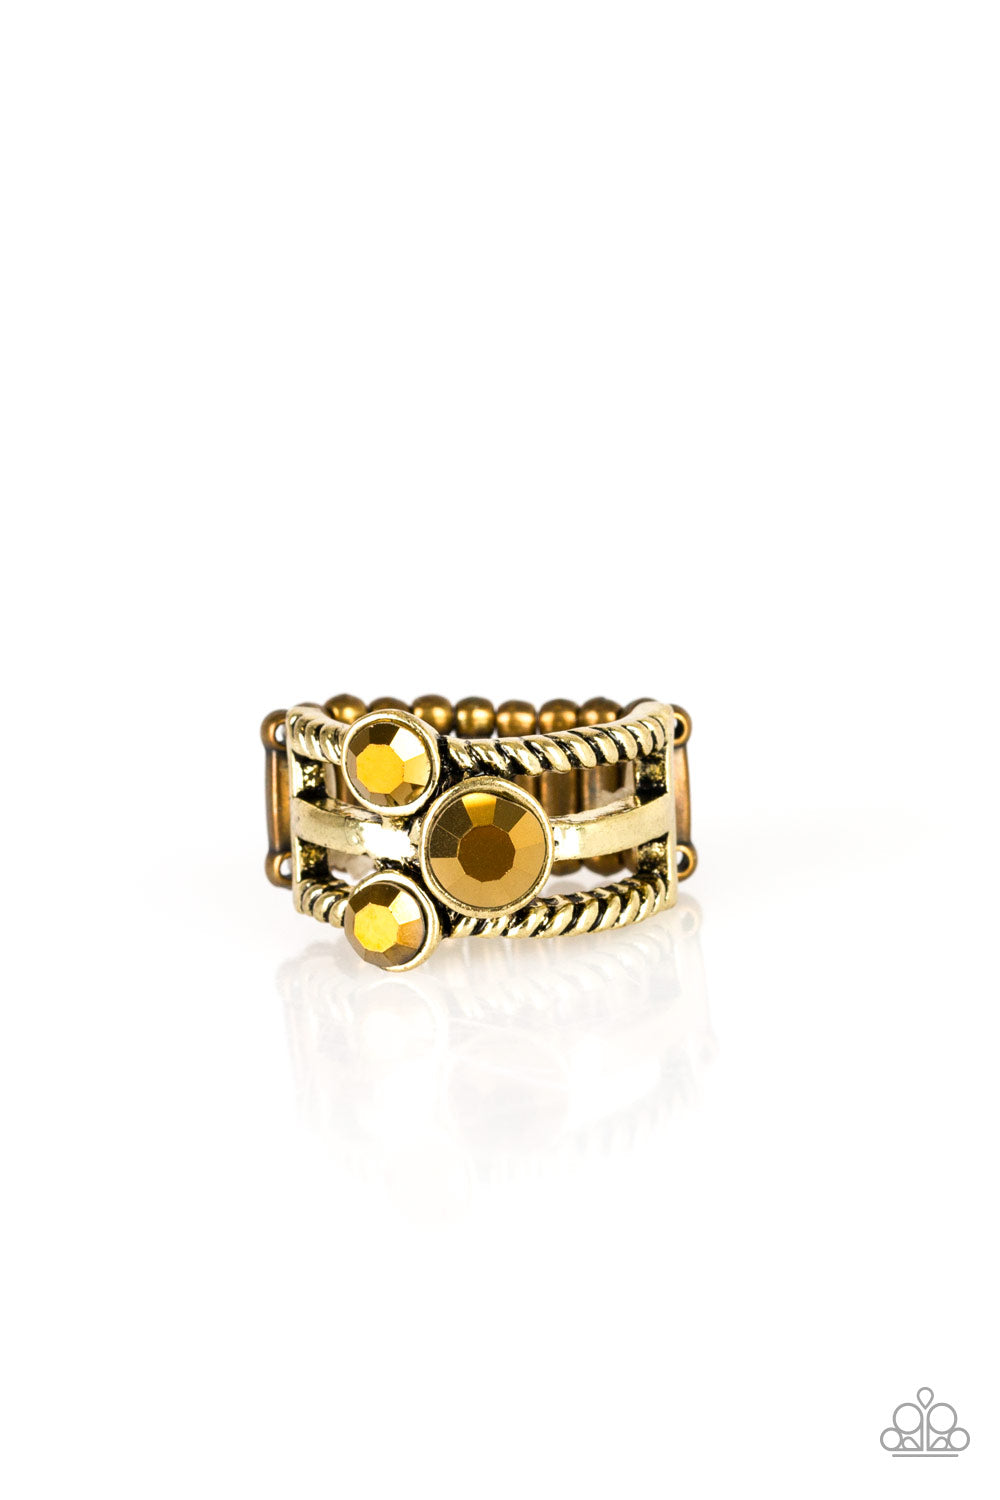 Head In The Stars - Brass Ring - Paparazzi Accessories - A trio of glittery aurum rhinestones are sprinkled along smooth and twisted brass bands, creating edgy layers across the finger. Features a stretchy band for a flexible fit. Sold as one individual ring.